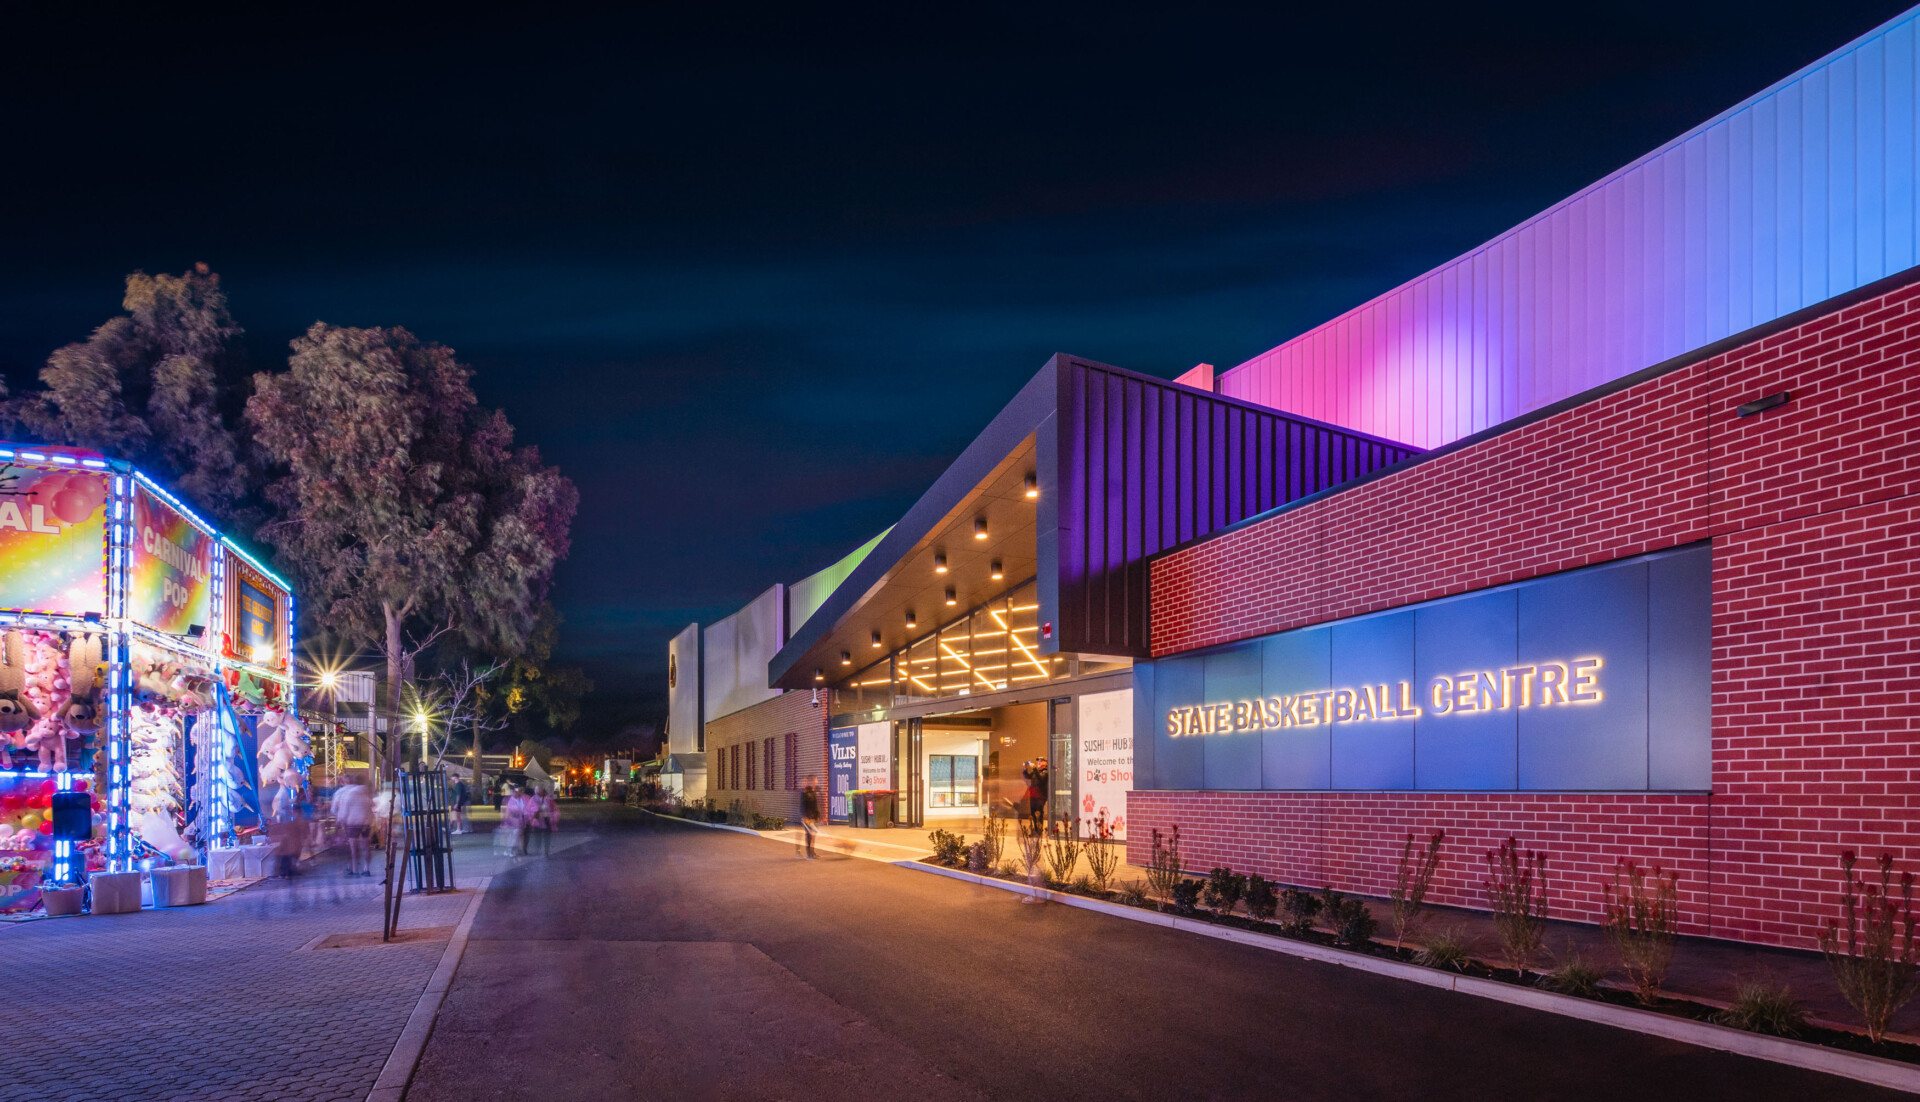 A carnival spirit is in this shot at night. Showground sideshows are installed adjacent to the building which is lit up in pinks, purples, blues and green light projected on the canopy. The building name is LED backlit and glows warm white together with the cross hatched lighting of the entry foyer.